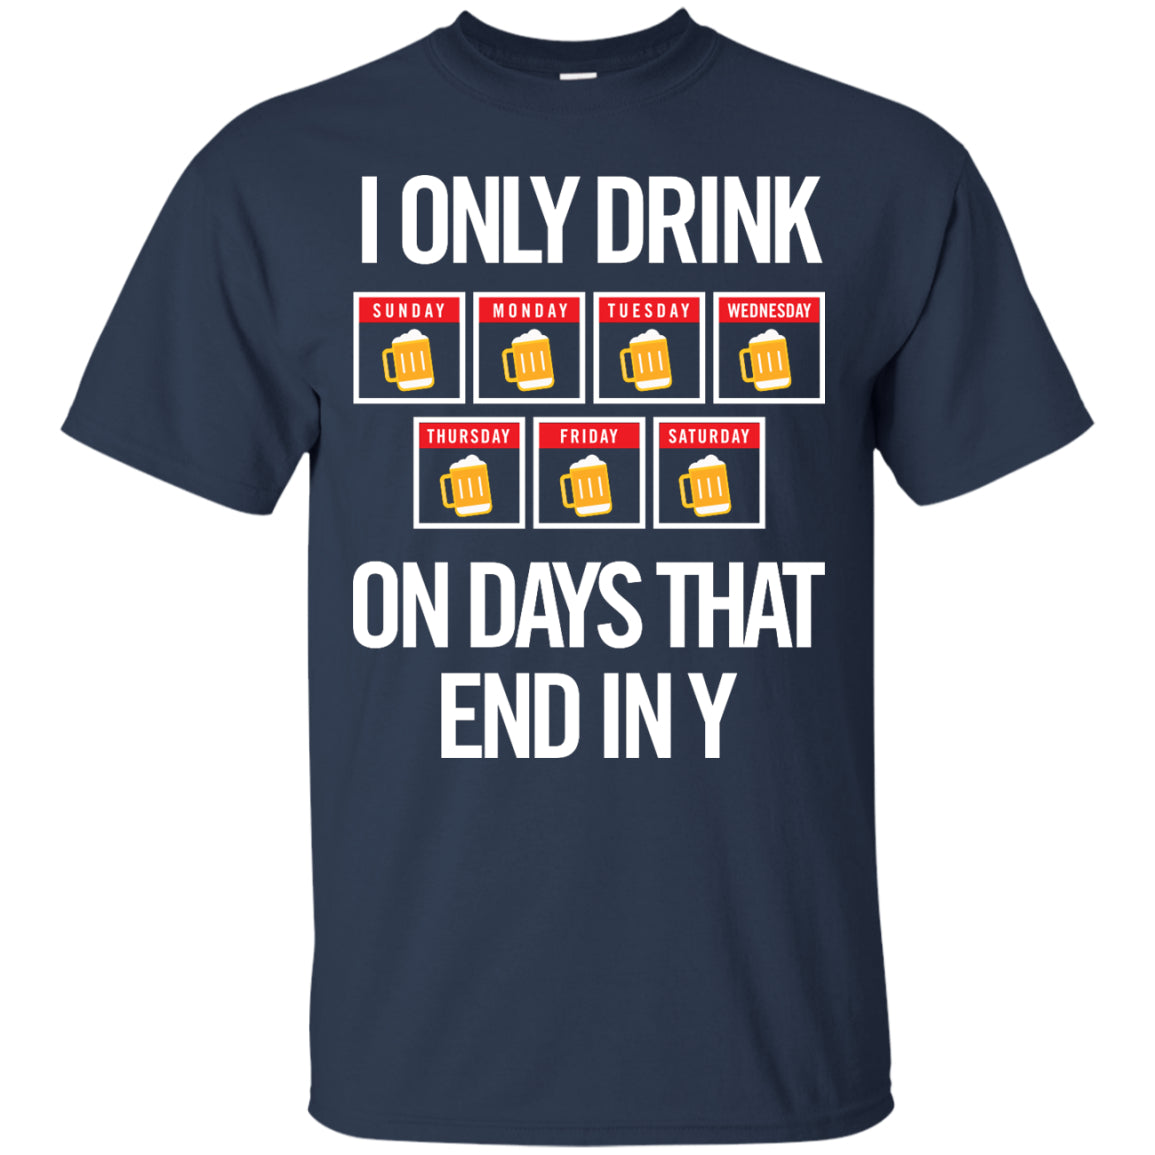 I Only Drink On Days That End In Y T-Shirt Apparel - The Beer Lodge